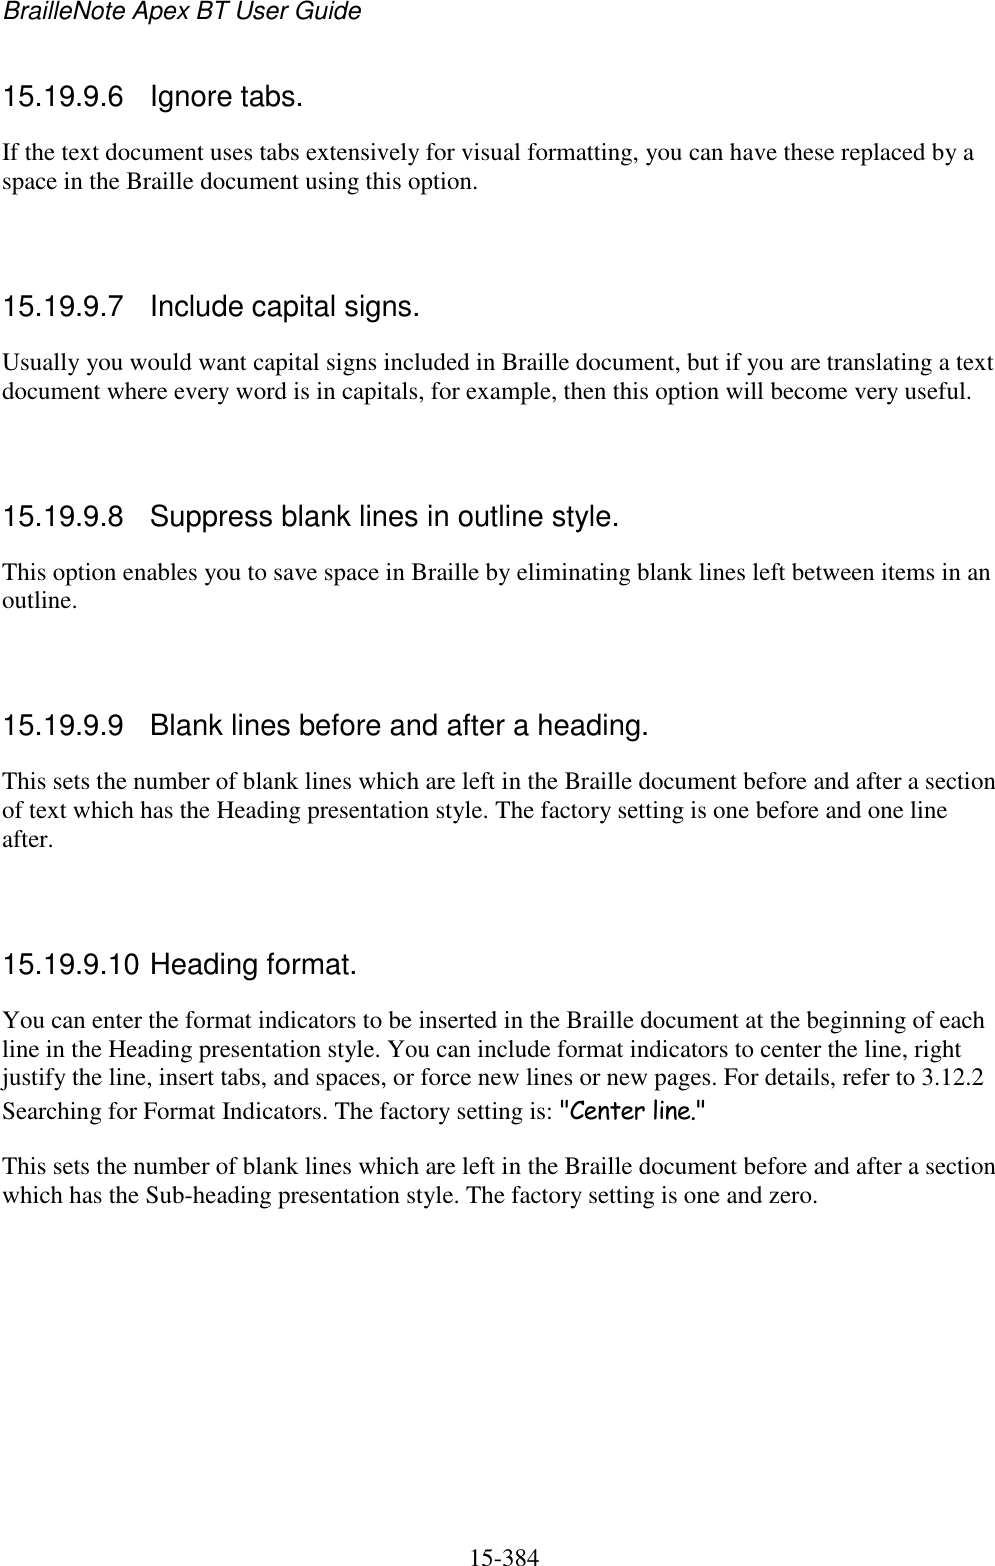 BrailleNote Apex BT User Guide   15-384   15.19.9.6  Ignore tabs. If the text document uses tabs extensively for visual formatting, you can have these replaced by a space in the Braille document using this option.   15.19.9.7  Include capital signs. Usually you would want capital signs included in Braille document, but if you are translating a text document where every word is in capitals, for example, then this option will become very useful.   15.19.9.8  Suppress blank lines in outline style. This option enables you to save space in Braille by eliminating blank lines left between items in an outline.   15.19.9.9  Blank lines before and after a heading. This sets the number of blank lines which are left in the Braille document before and after a section of text which has the Heading presentation style. The factory setting is one before and one line after.   15.19.9.10 Heading format. You can enter the format indicators to be inserted in the Braille document at the beginning of each line in the Heading presentation style. You can include format indicators to center the line, right justify the line, insert tabs, and spaces, or force new lines or new pages. For details, refer to 3.12.2 Searching for Format Indicators. The factory setting is: &quot;Center line.&quot; This sets the number of blank lines which are left in the Braille document before and after a section which has the Sub-heading presentation style. The factory setting is one and zero.   